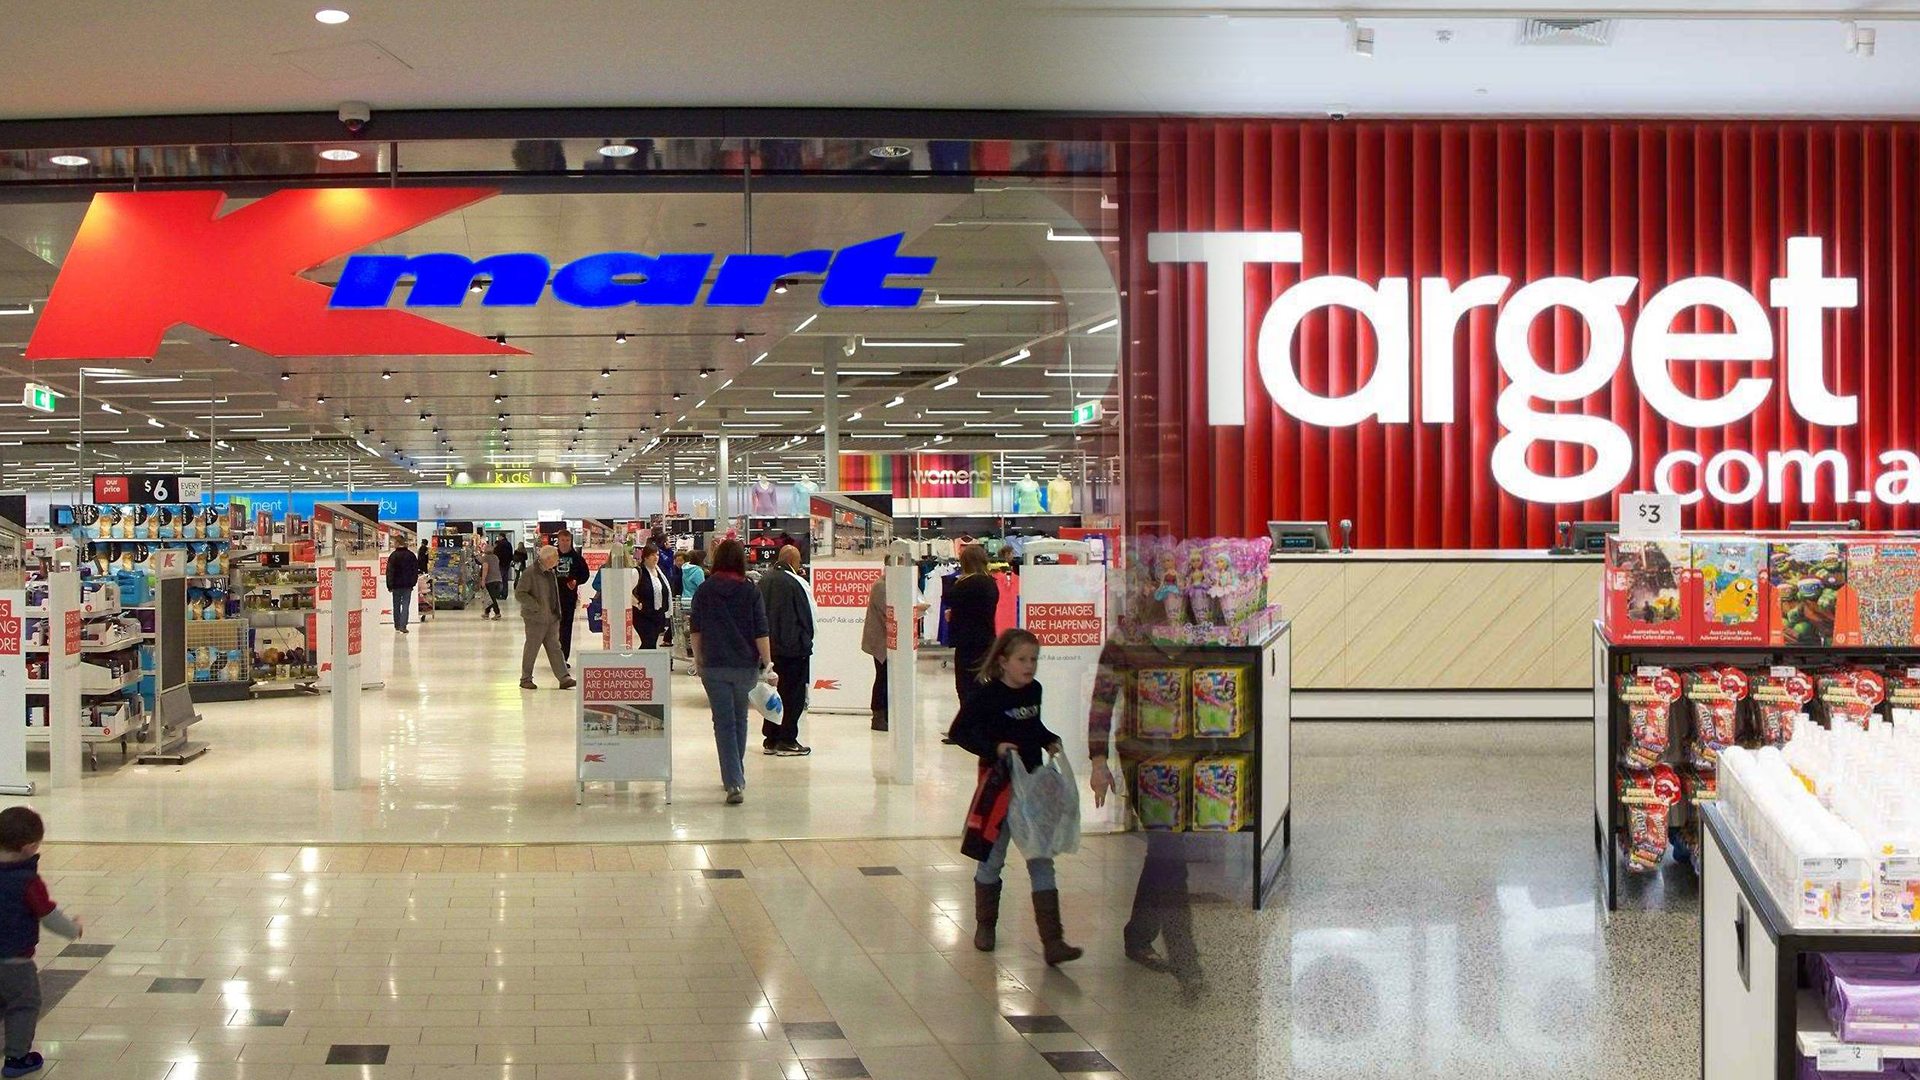 FULL LIST: The Target Stores Set To Close And Rebrand As Kmart In 2021